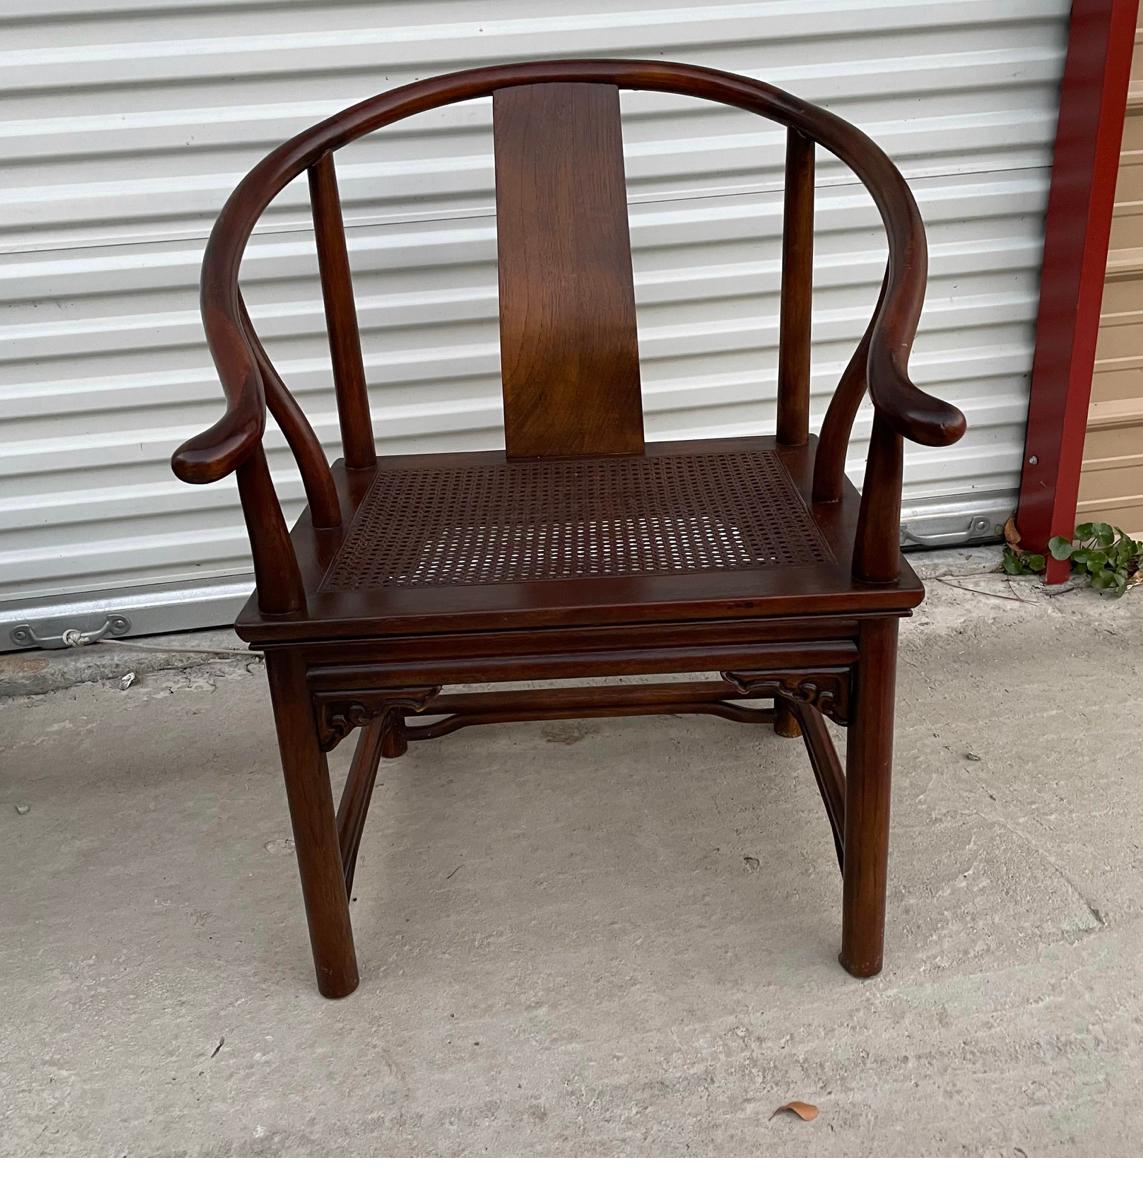 Carved Henredon Heritage Horseshoe Chinoiserie Chair with Caning